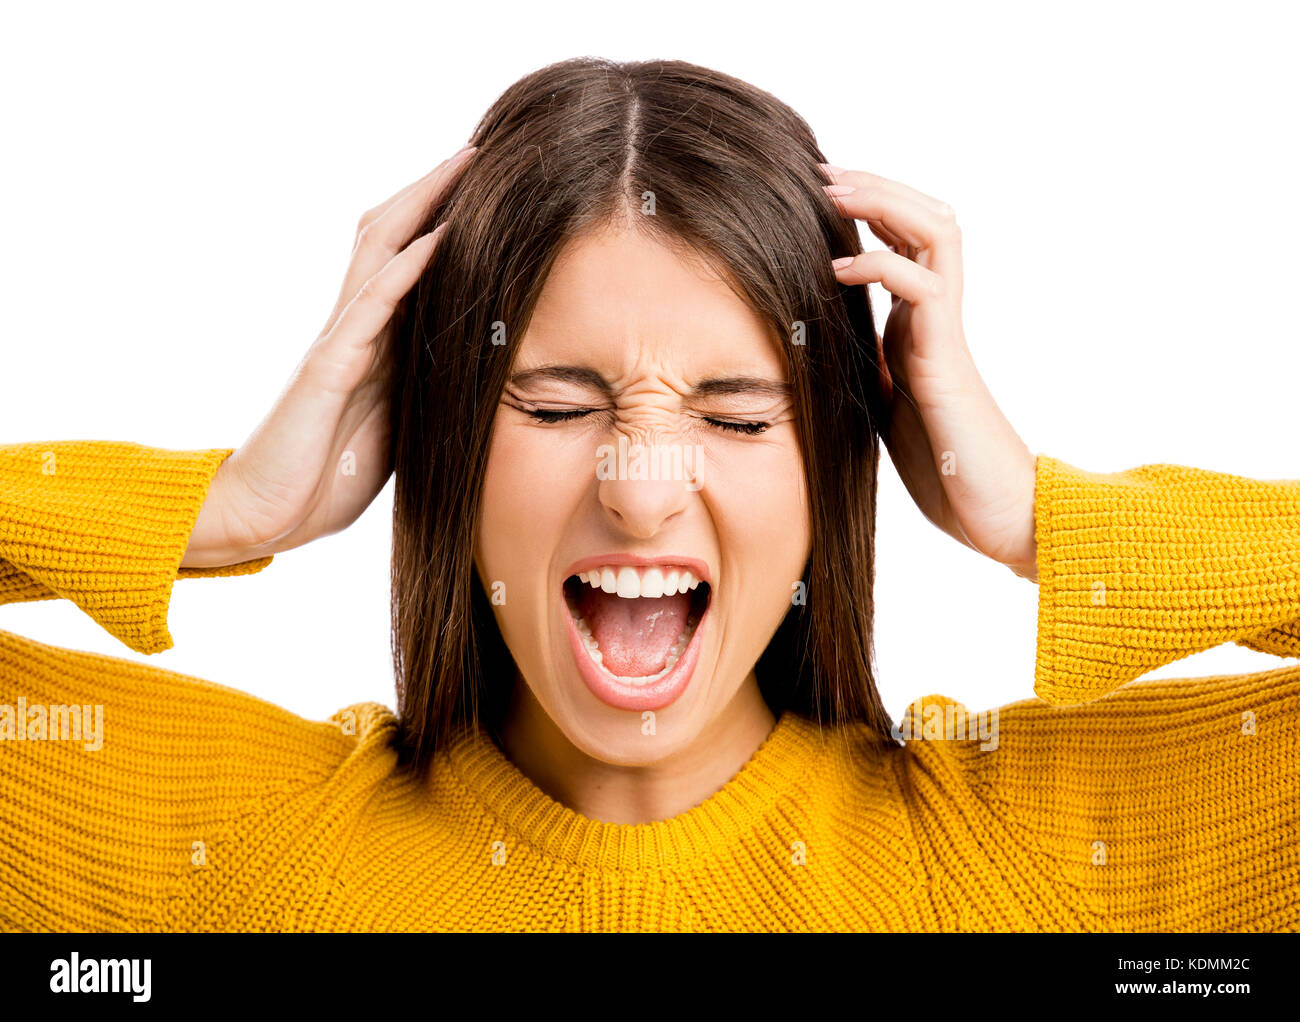 Portrait of a stressed young girl yelling Stock Photo